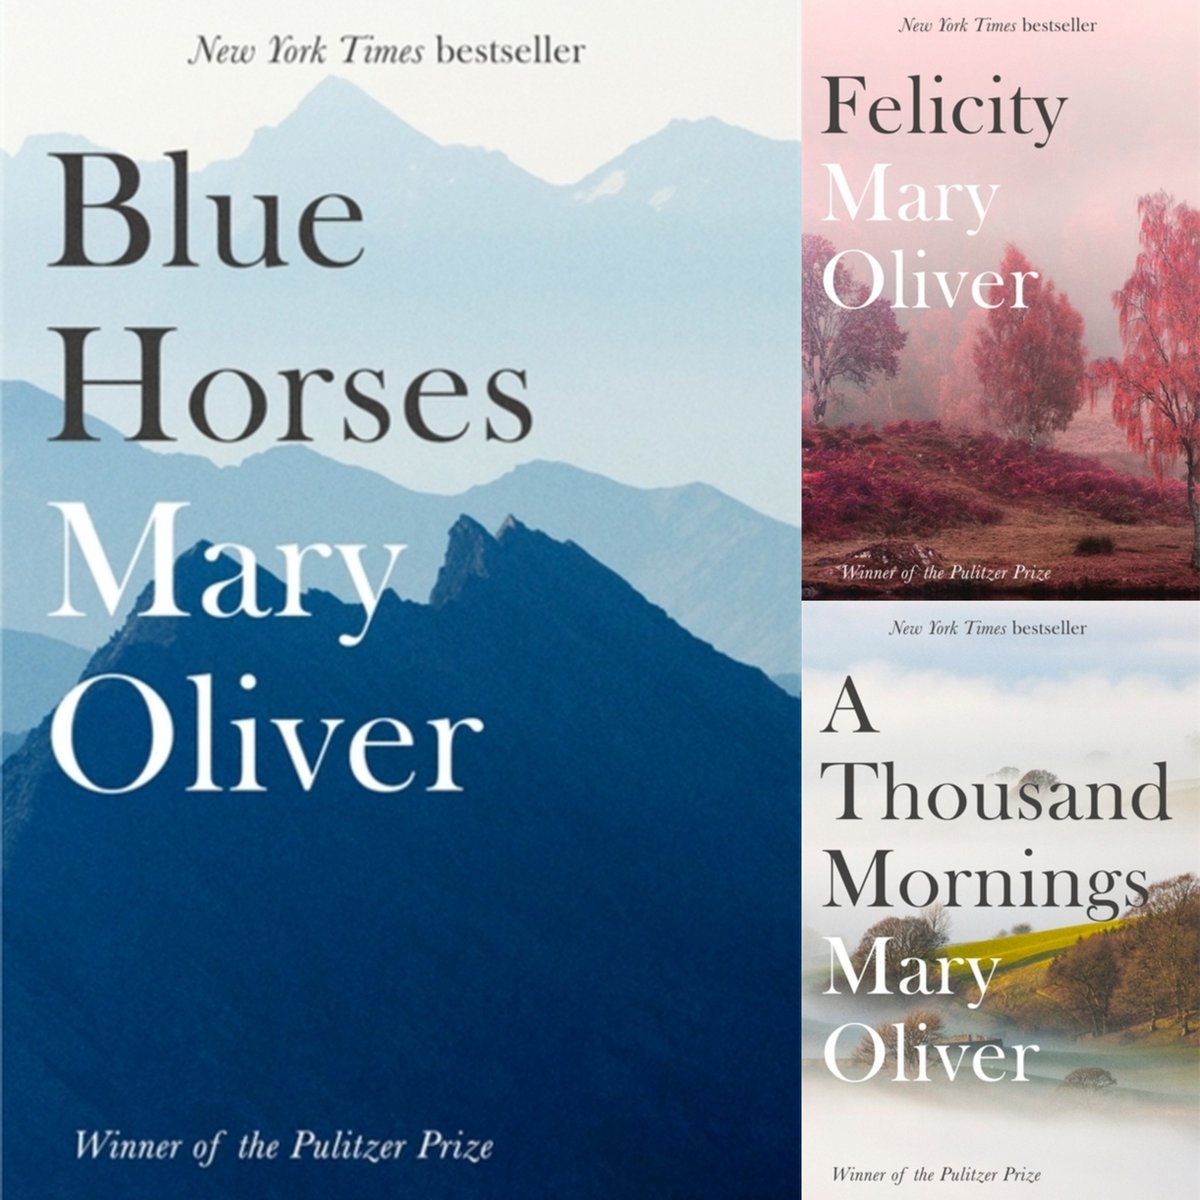 Mary Oliver's nature poetry, a balm for the soul. She also has a book of dedicated dog poems, and an essay collection if prose is more your thing.  https://twitter.com/ravenbooks/status/1241481859567149057